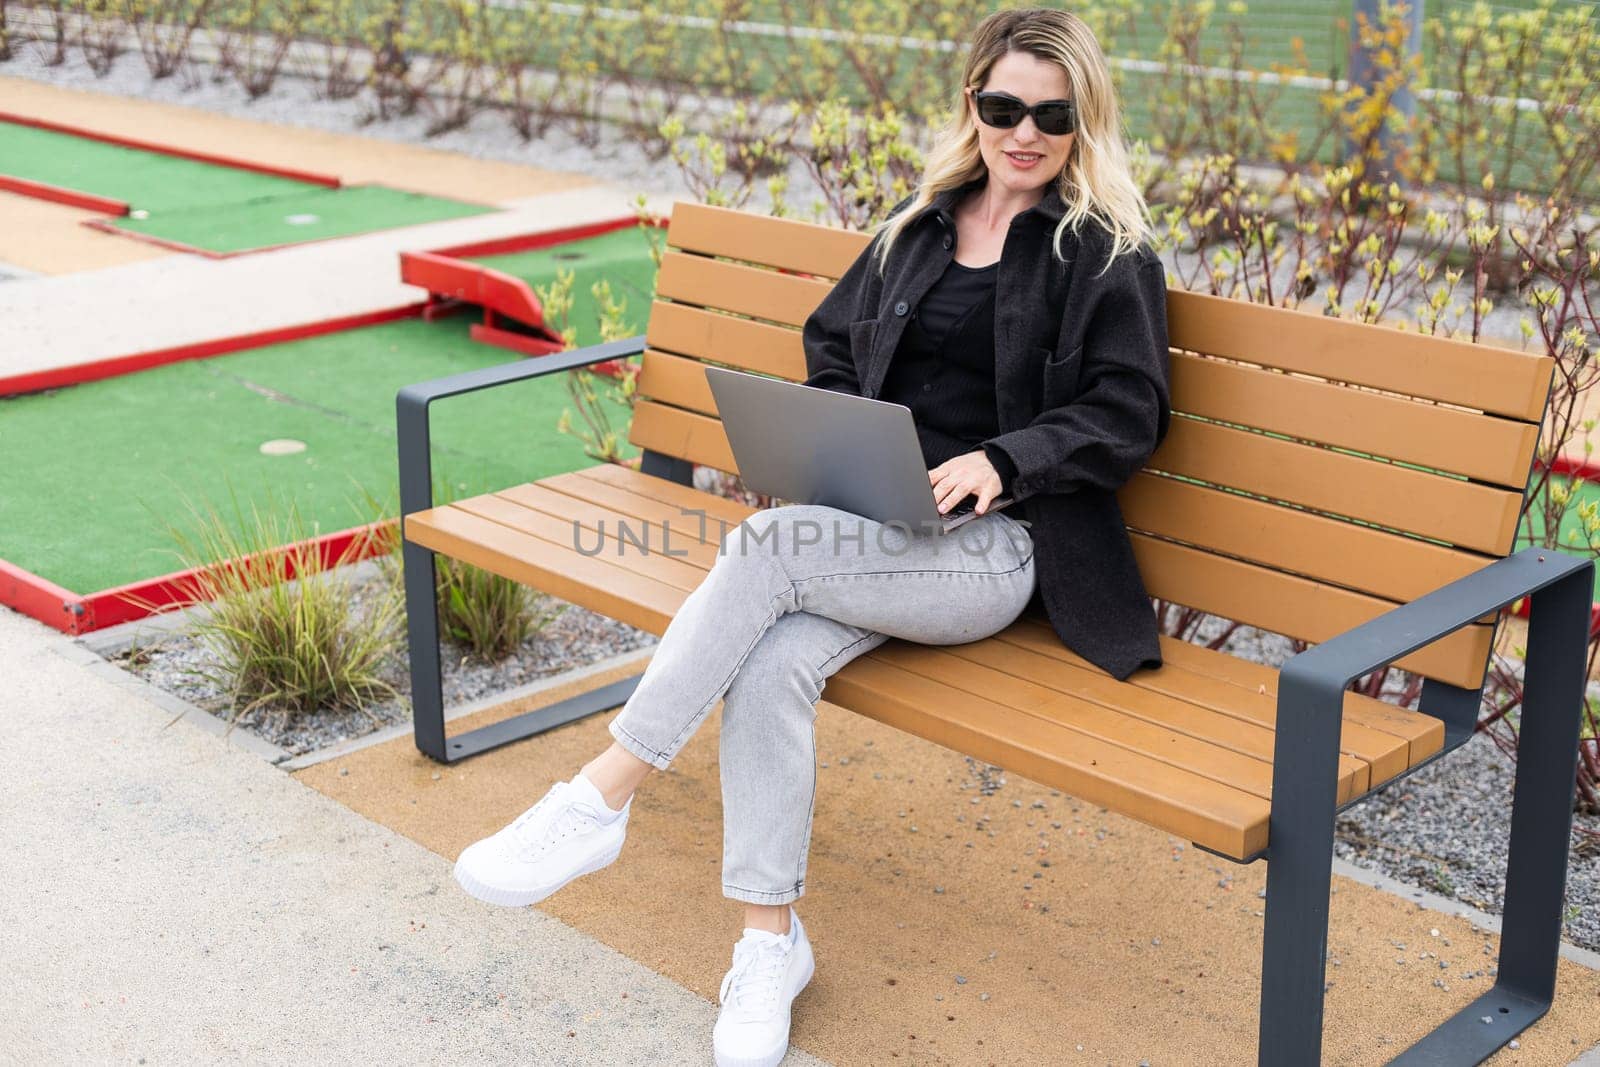 A businesswoman using a laptop on a golf course by Andelov13